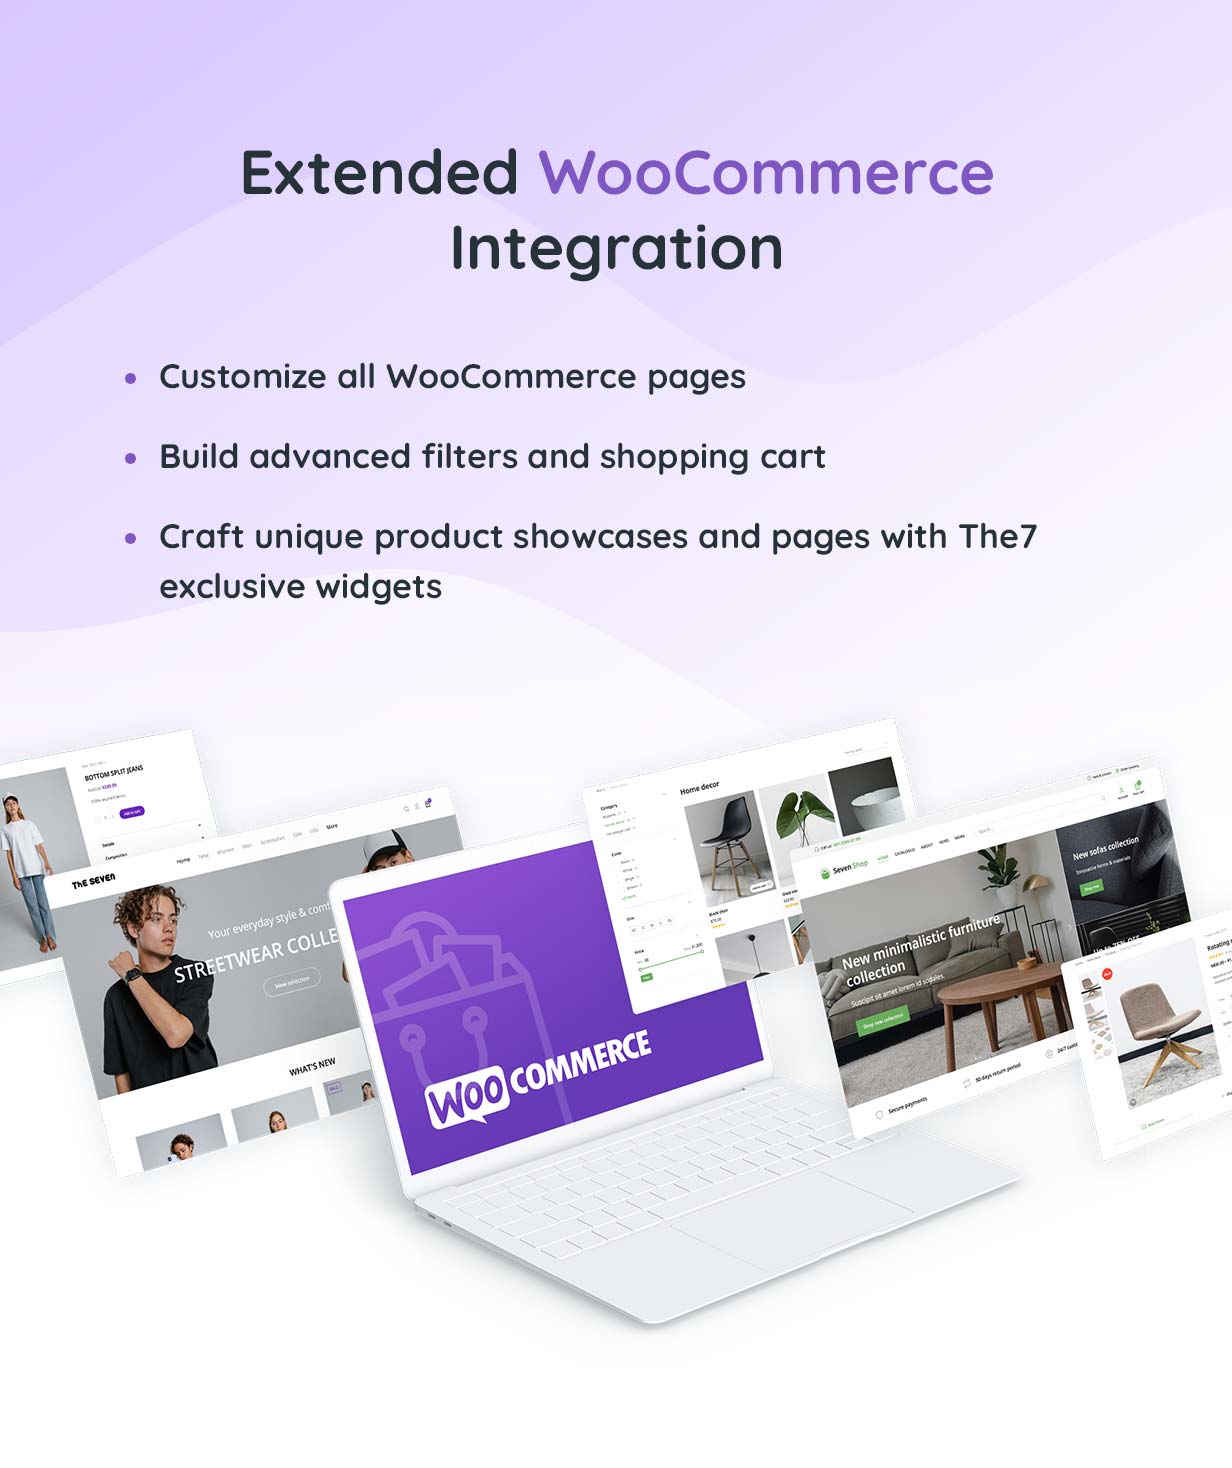 Extended WooCommerce Integration